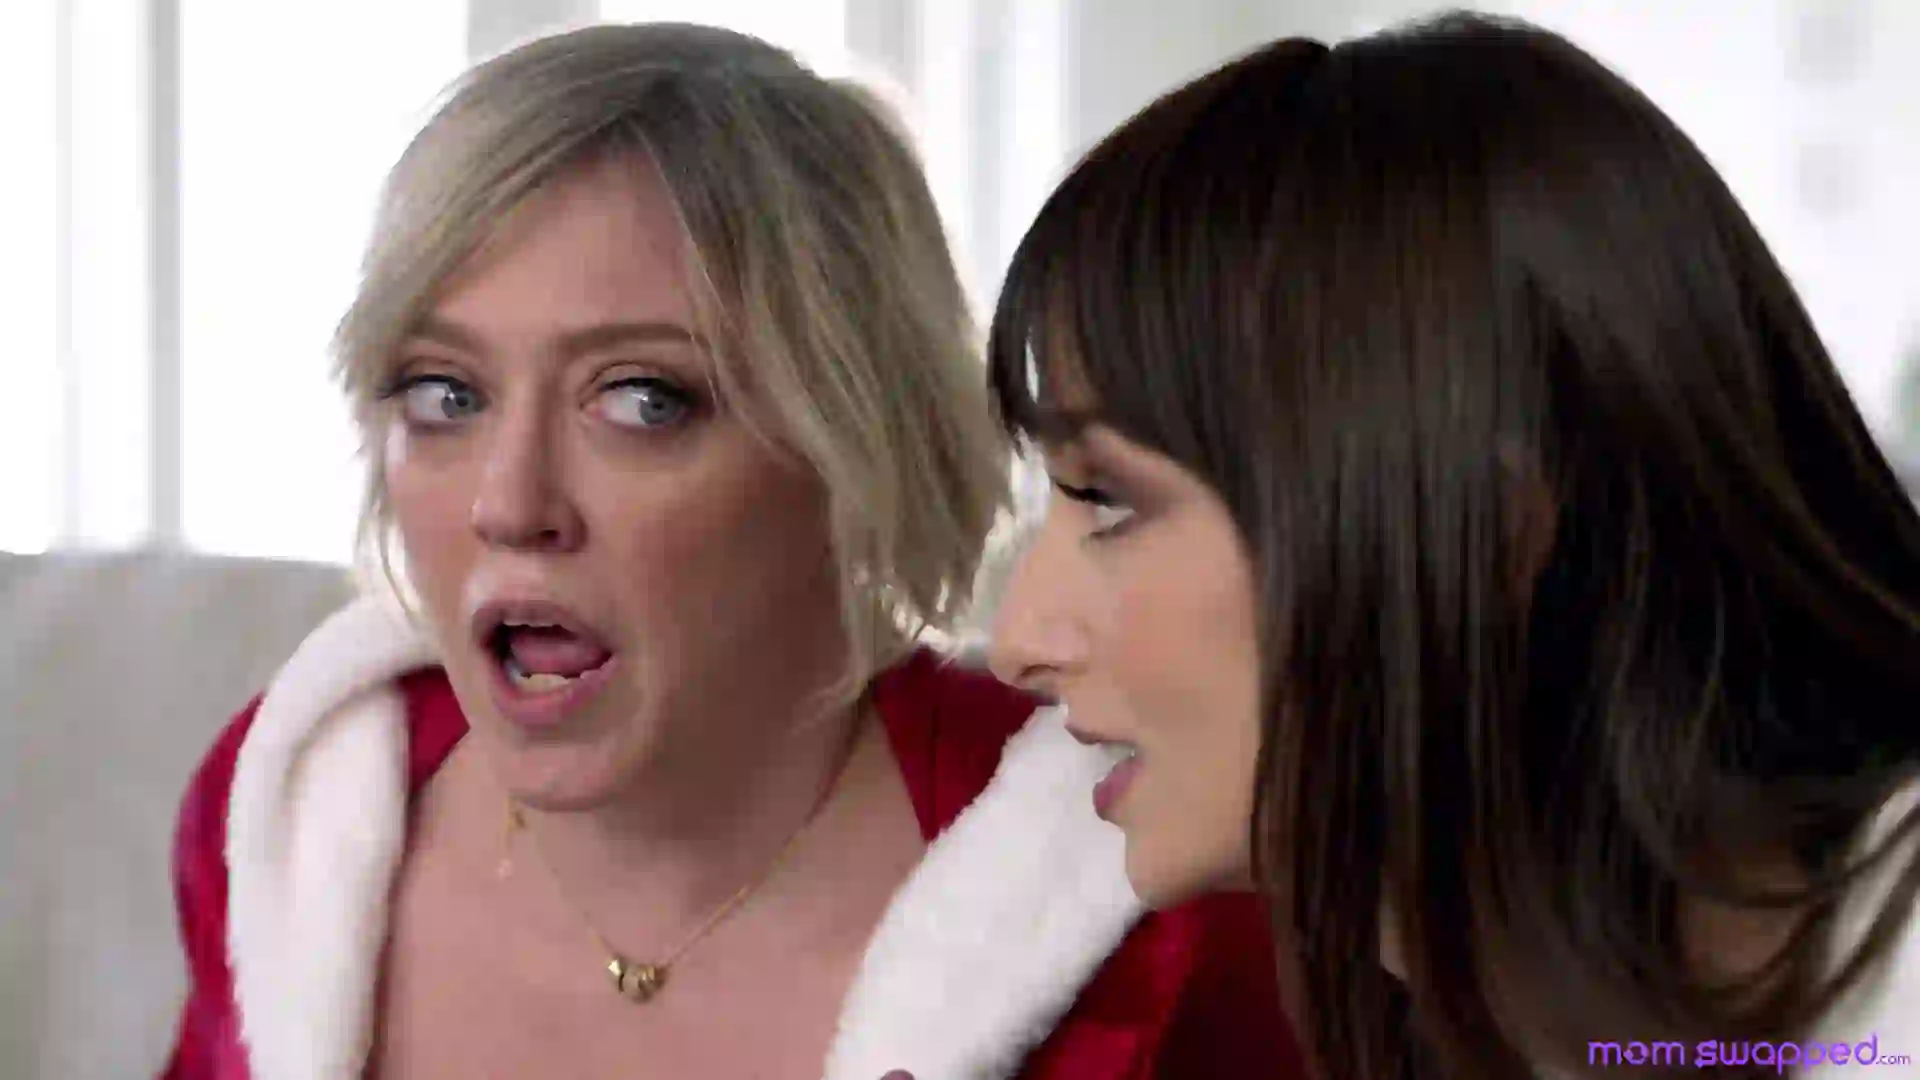 MomSwapped 22 12 21 Dee Williams And Lexi Luna Swapping Moms For Christmas XXX 1080p MP4